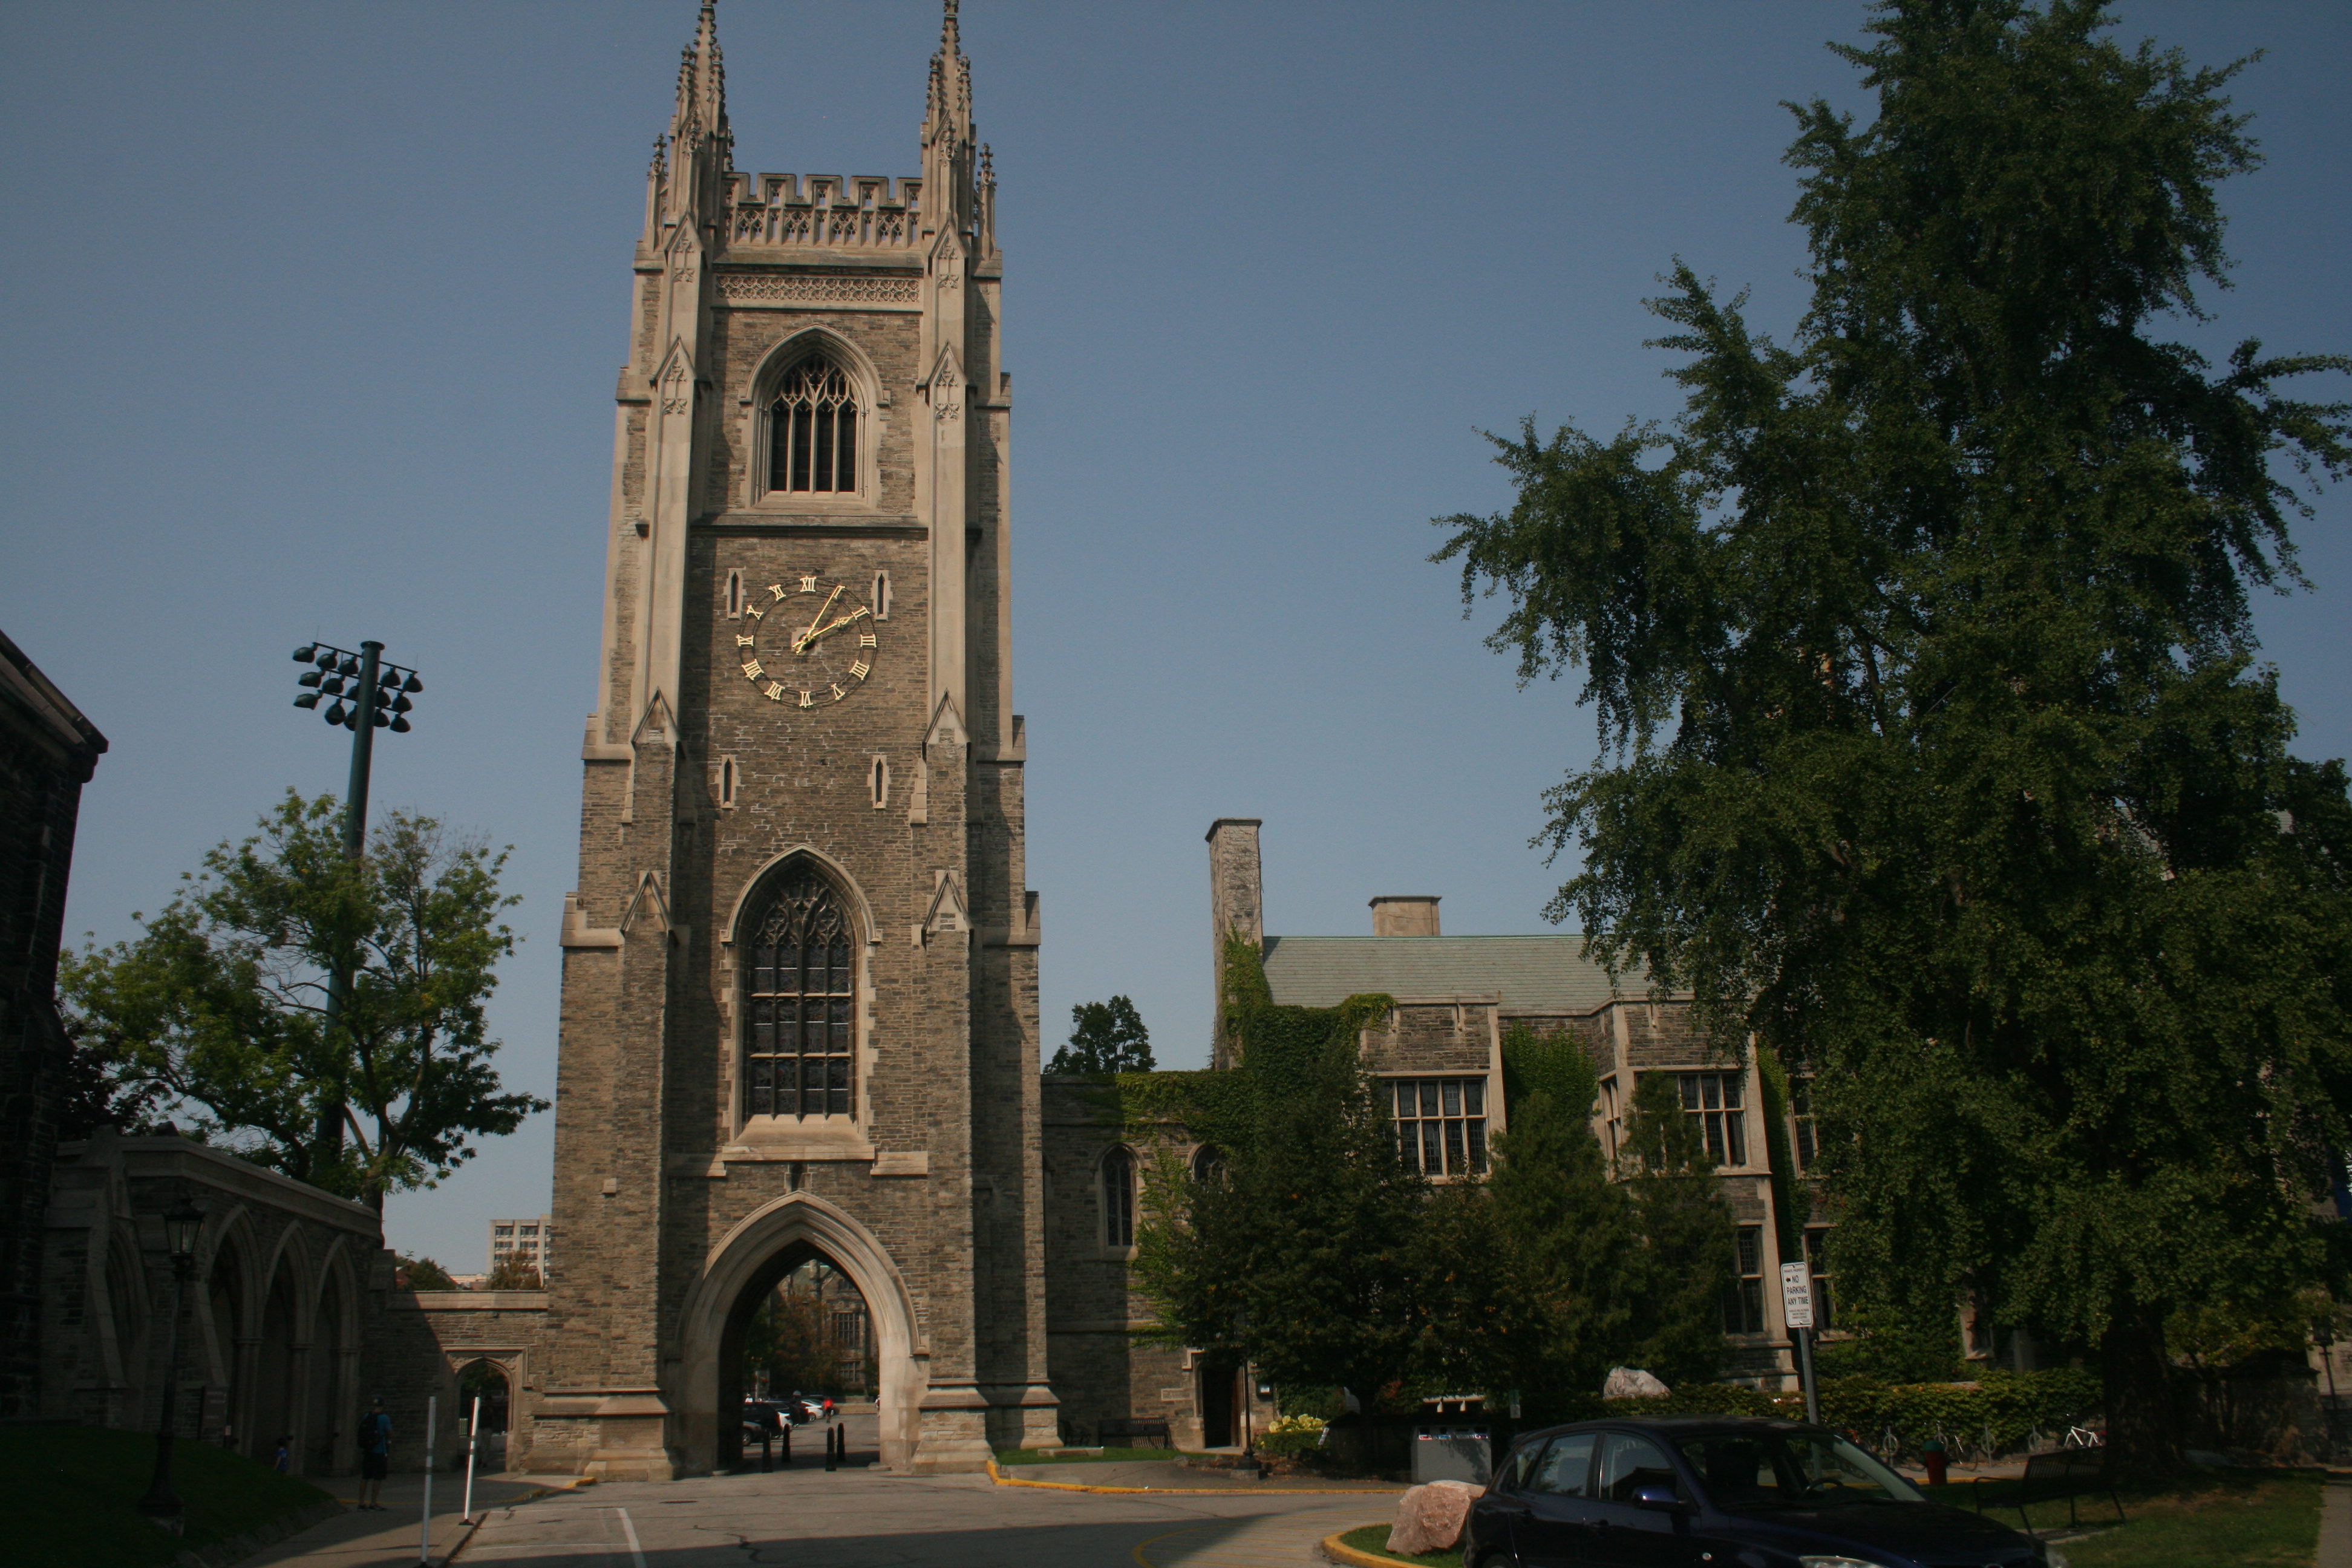 Exterior of Soldier's Tower at the University of Toronto.